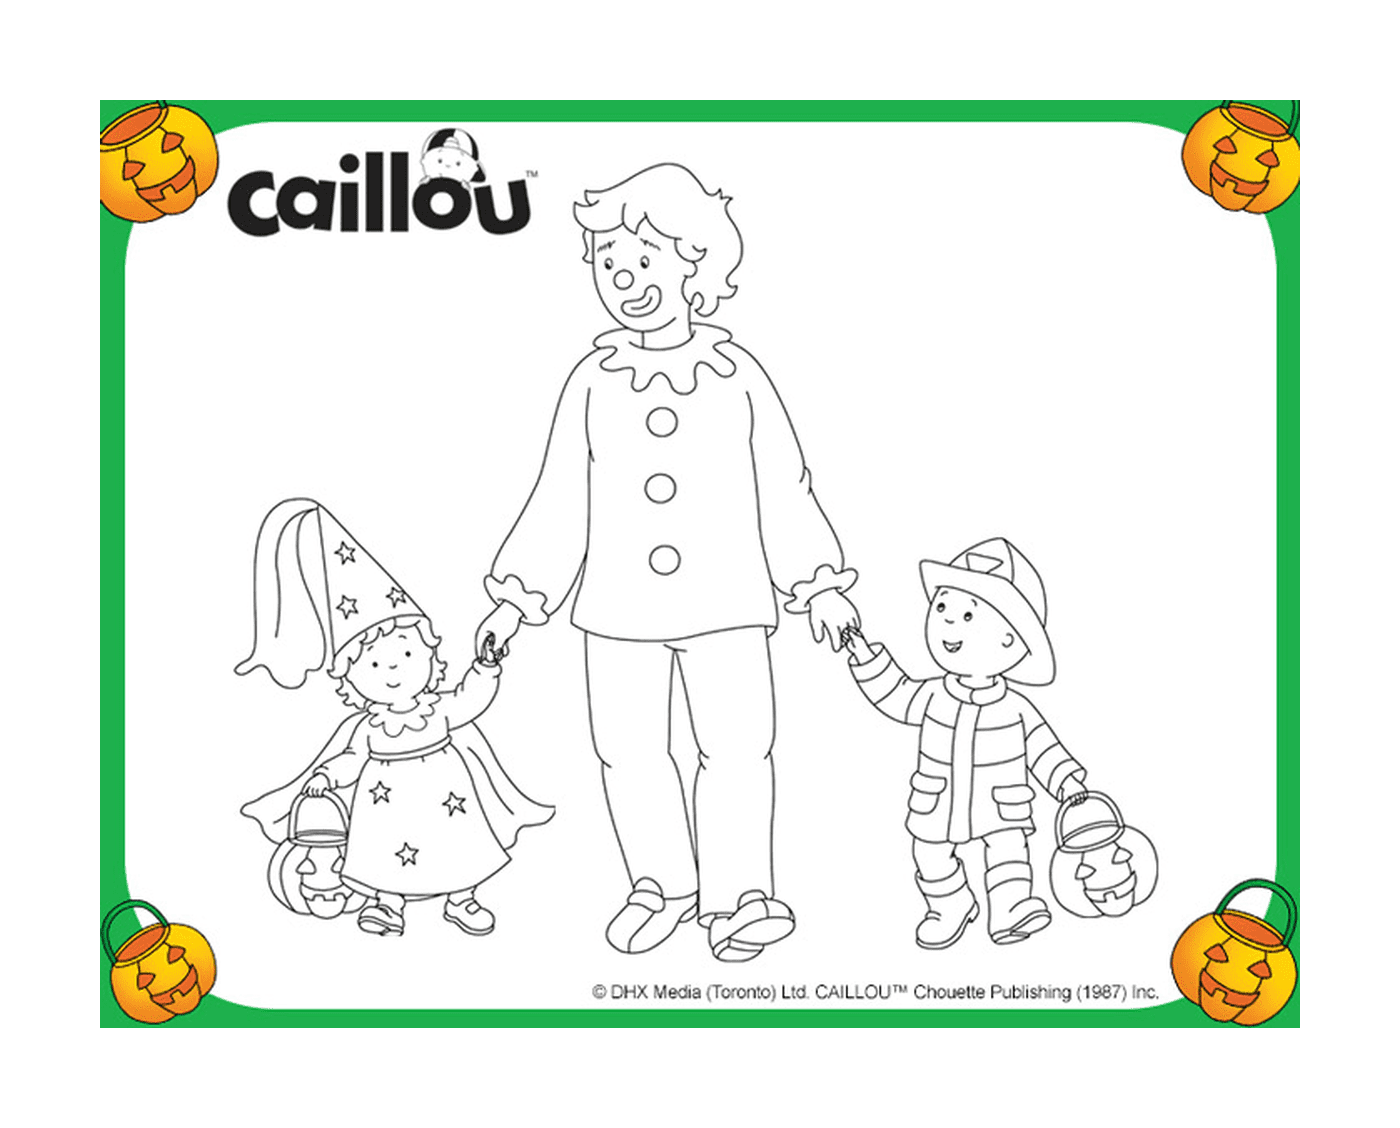  Caillou, Chiffon and Dad dress up for Halloween 